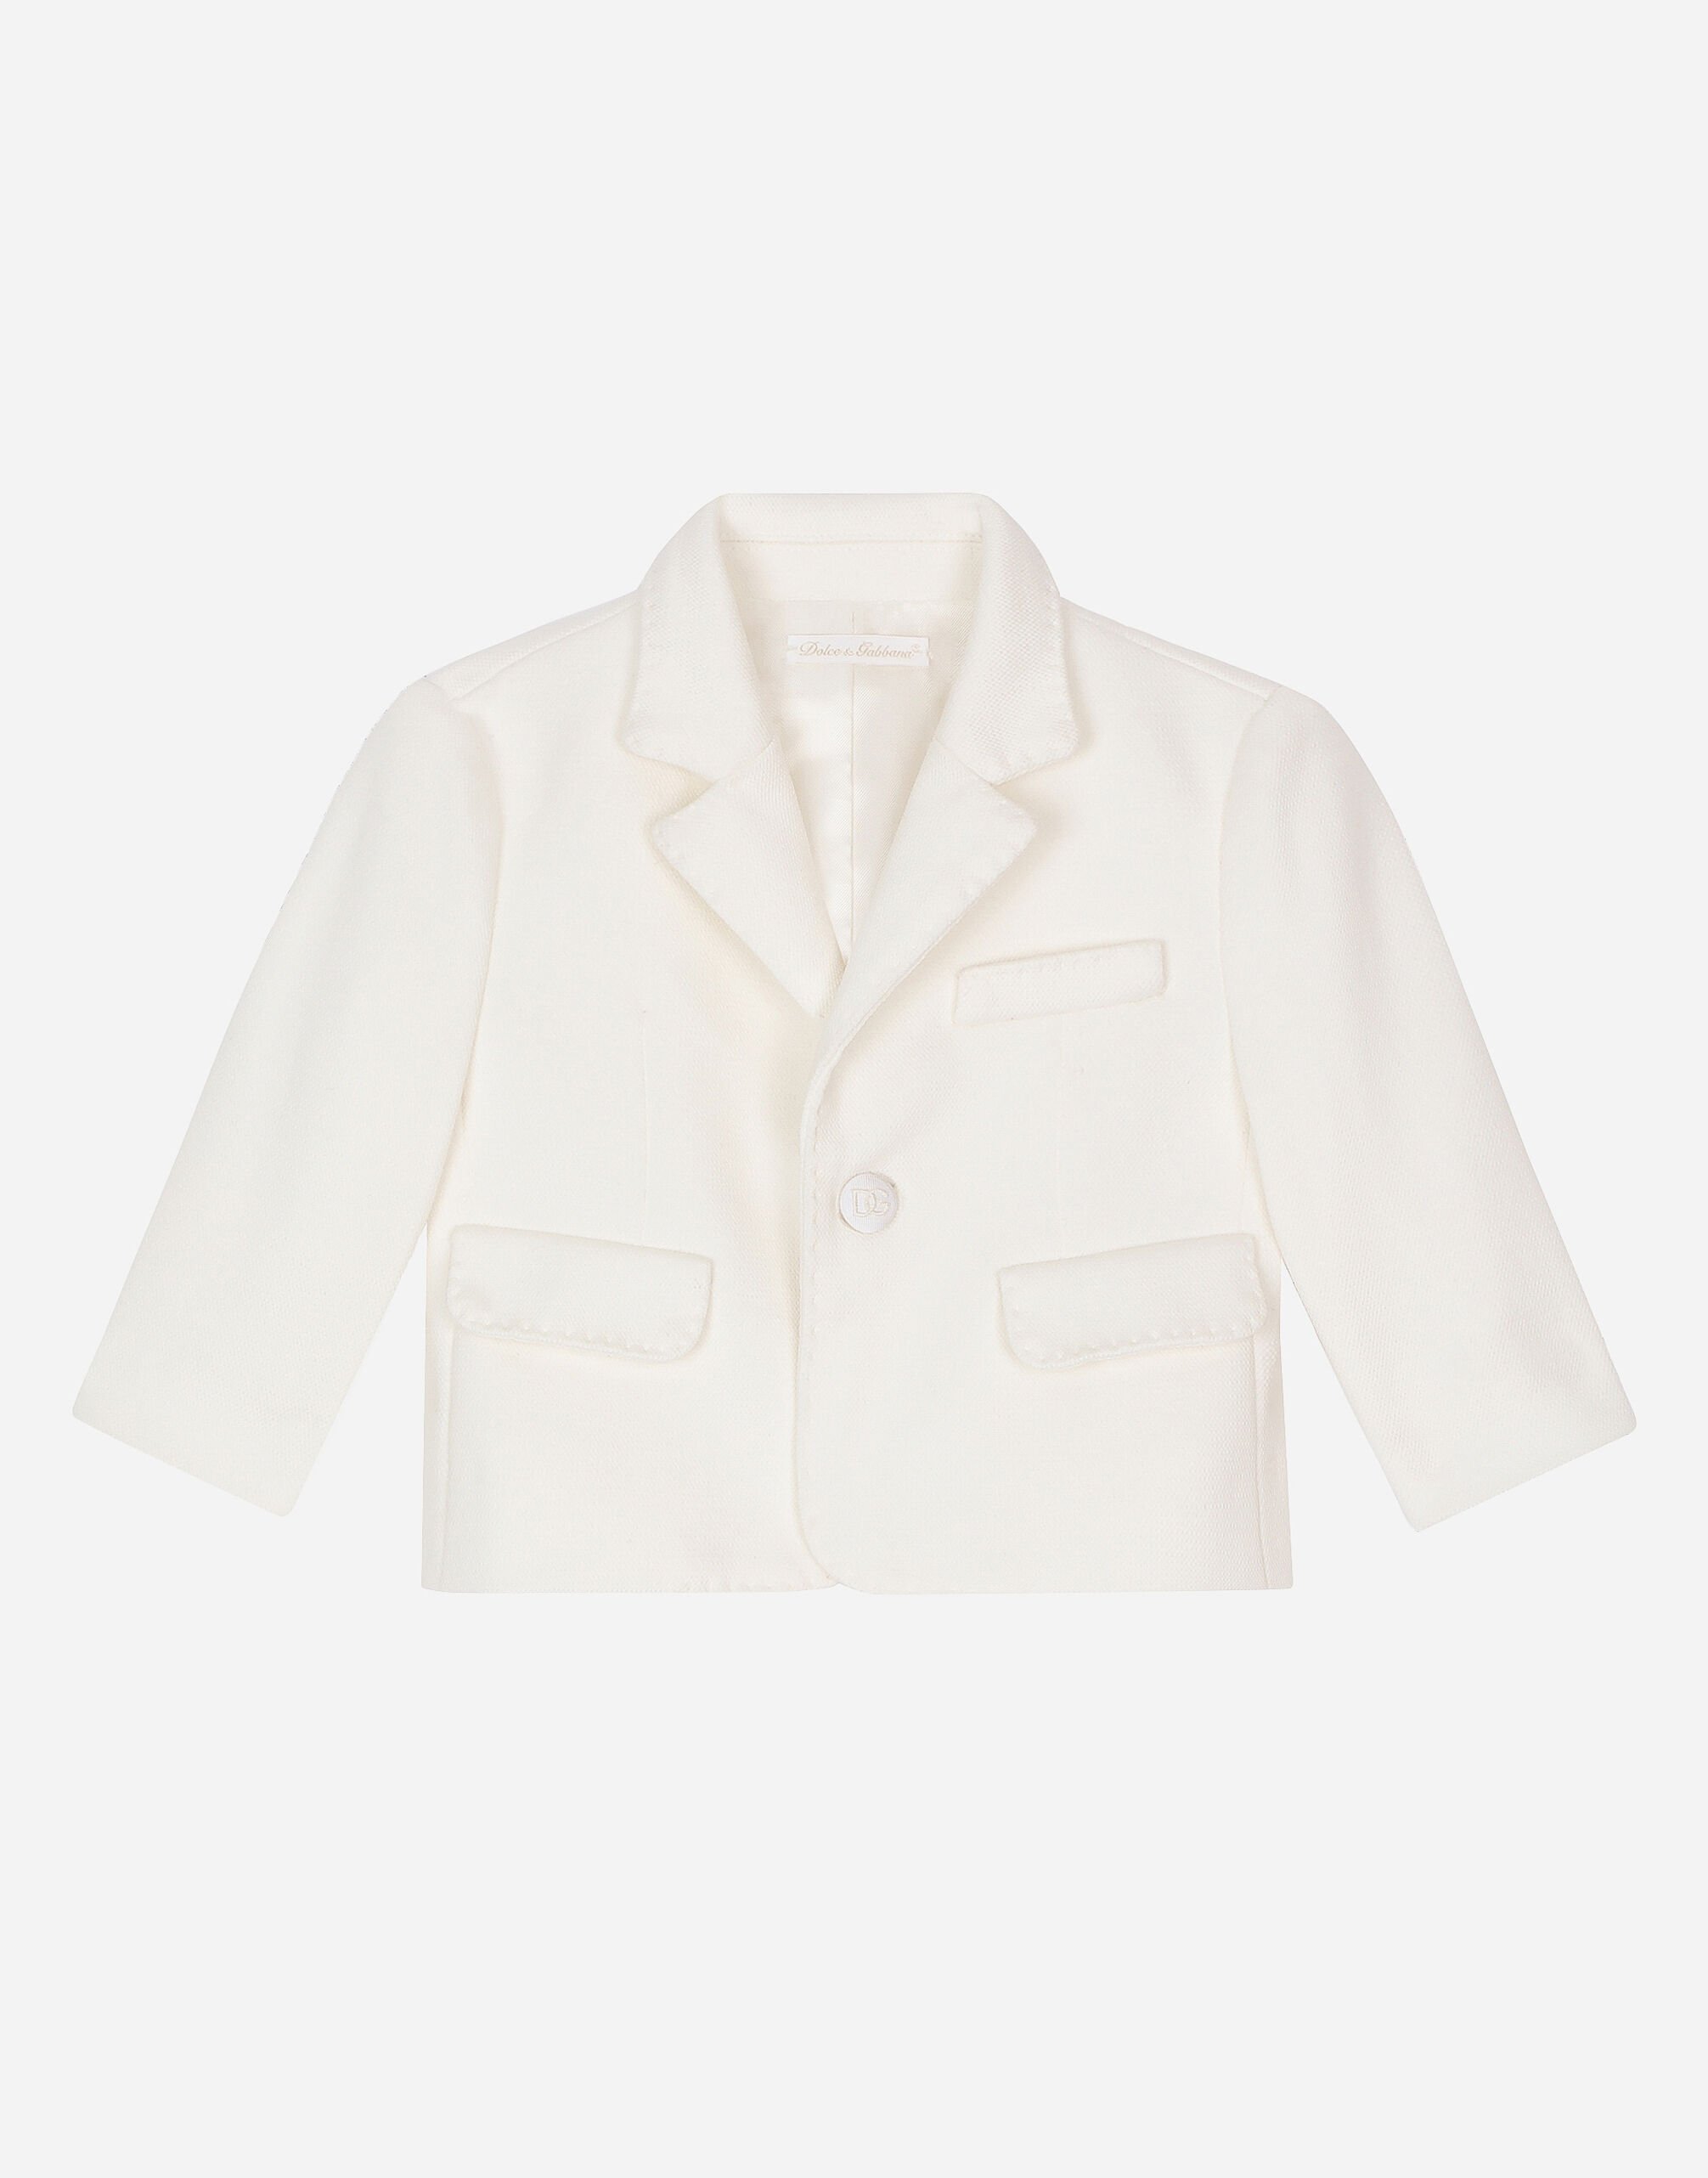 Dolce & Gabbana Classic single-breasted textured jersey jacket White L0EGG2FU1L6